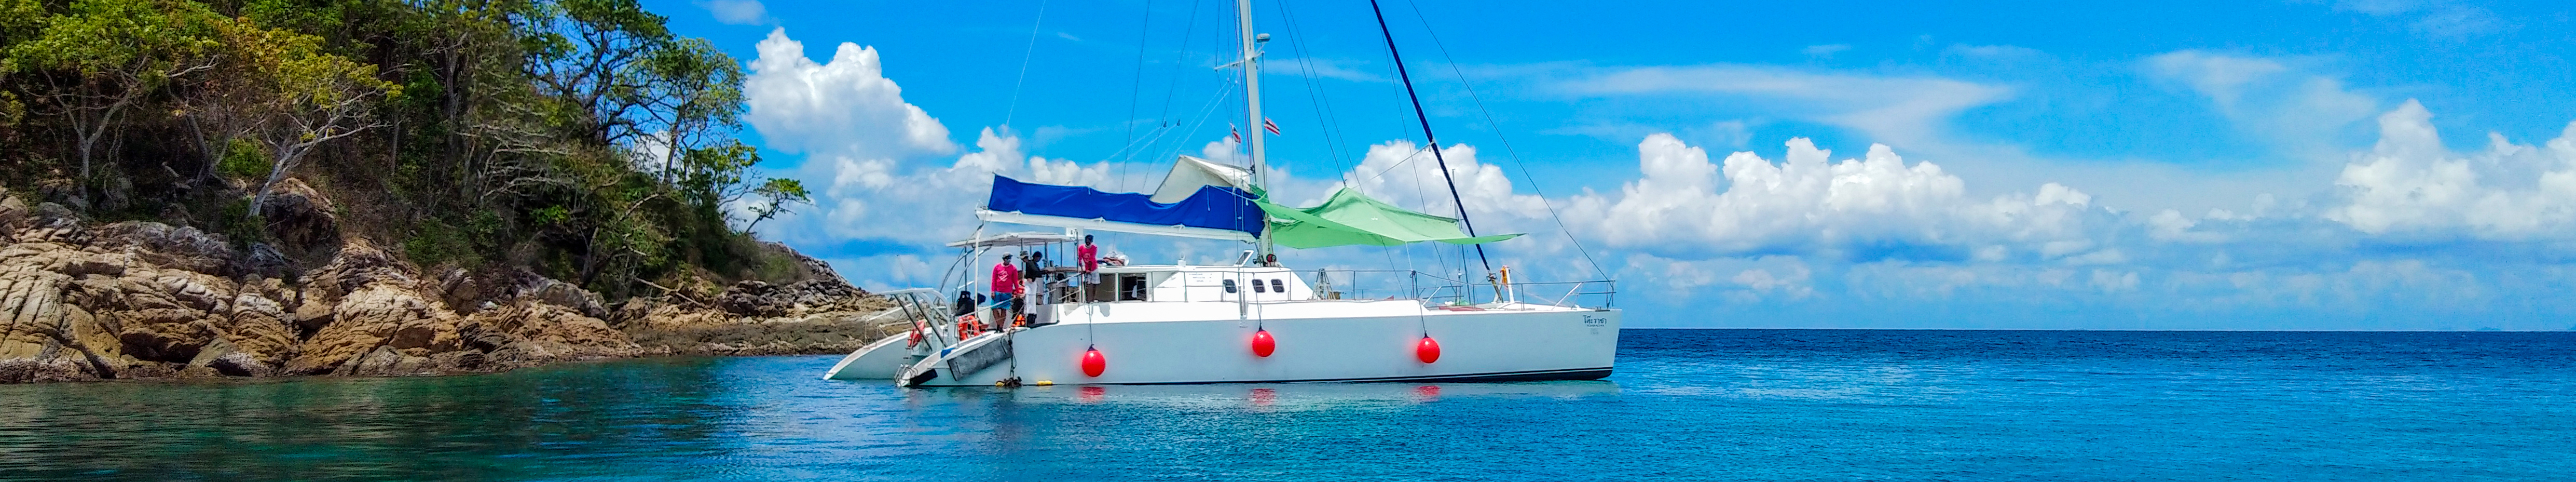 One Day Join Trip in Phuket by Sailing Yacht 2022 - Ticket2Attraction